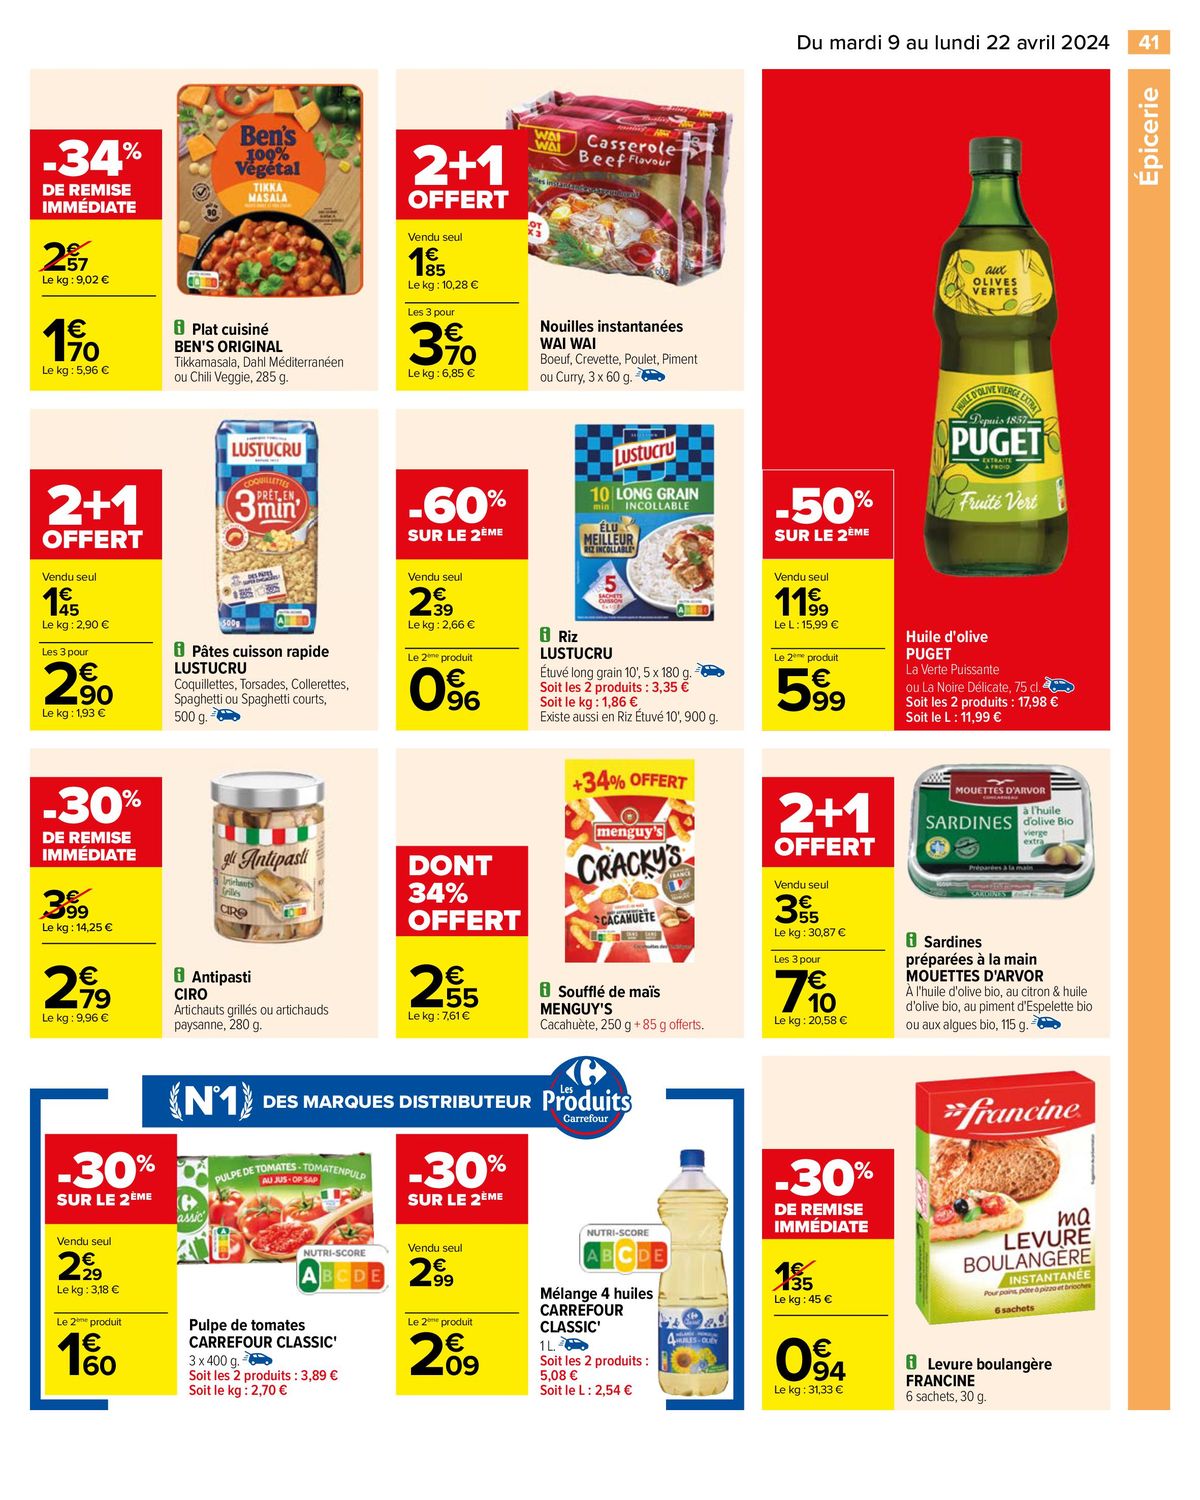 Catalogue OFFERT Carrefour Drive , page 00043